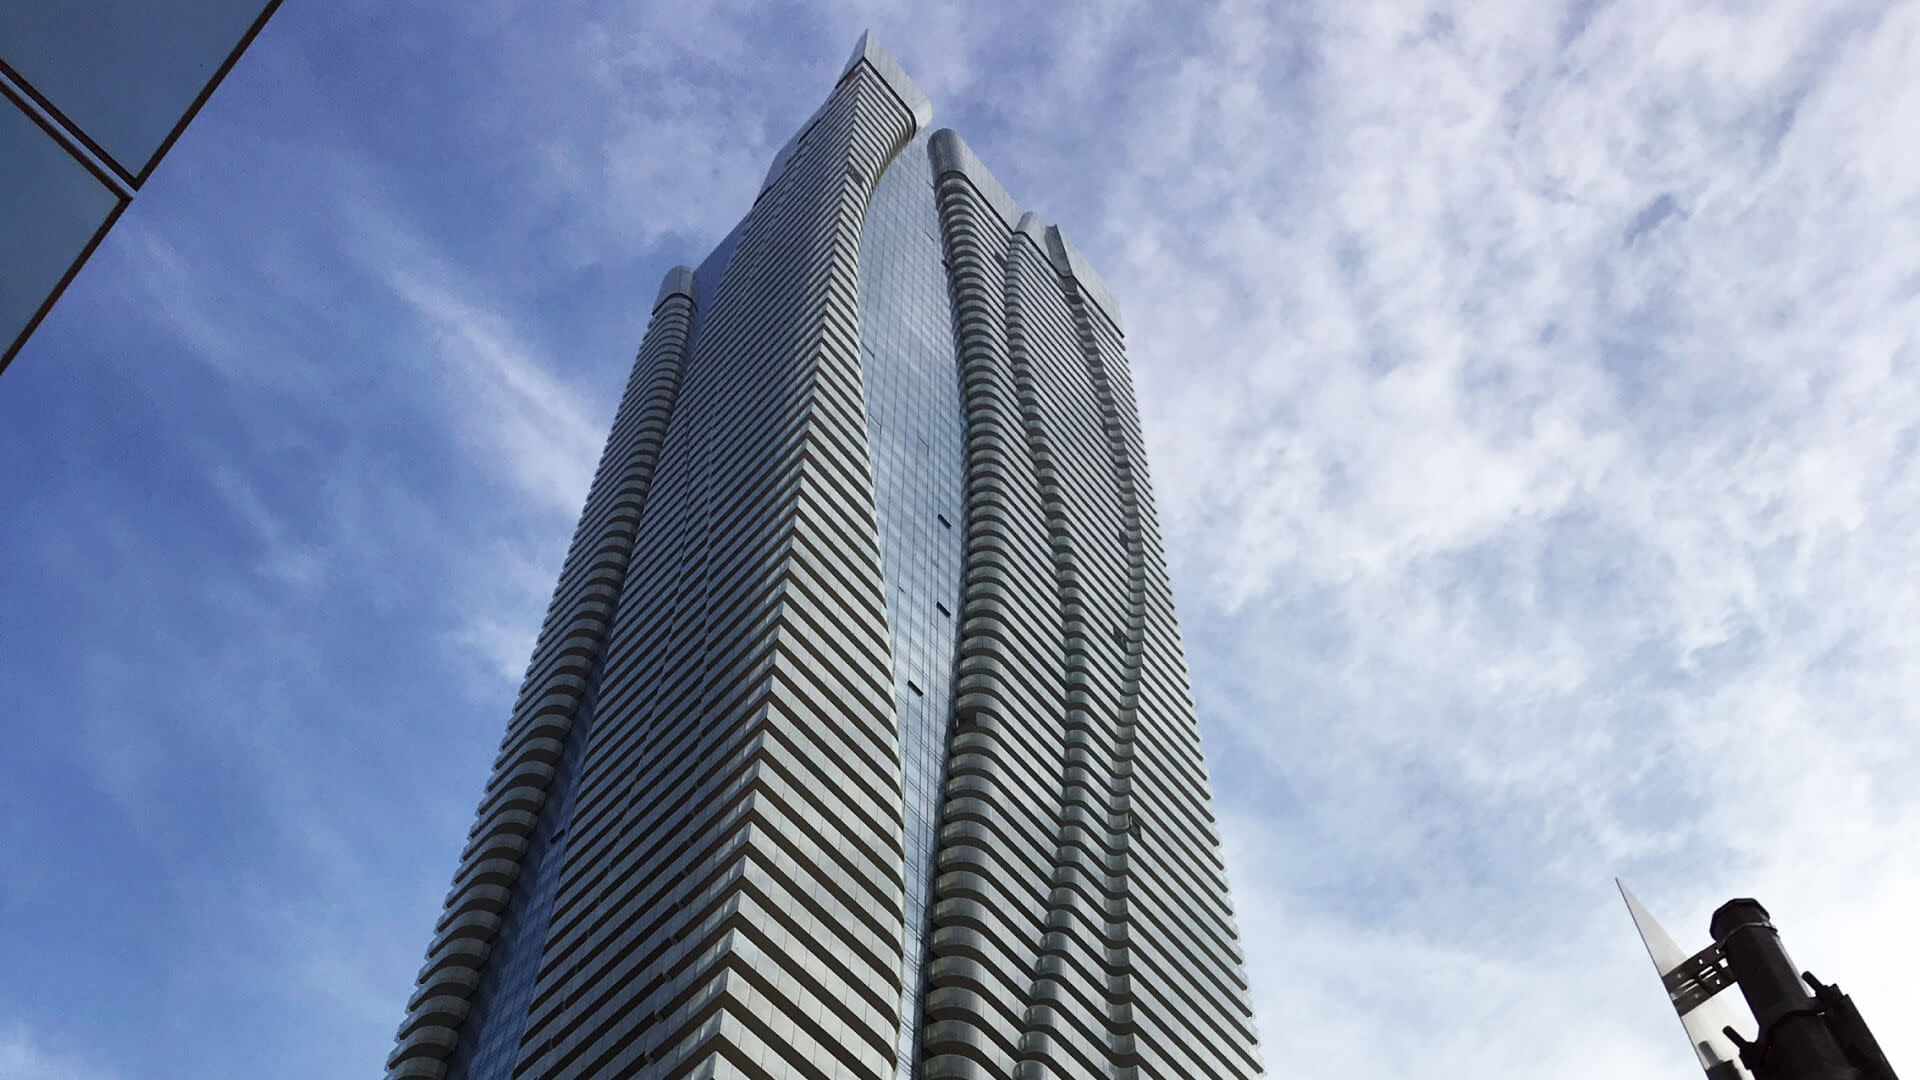 low angled view of a skyscraper